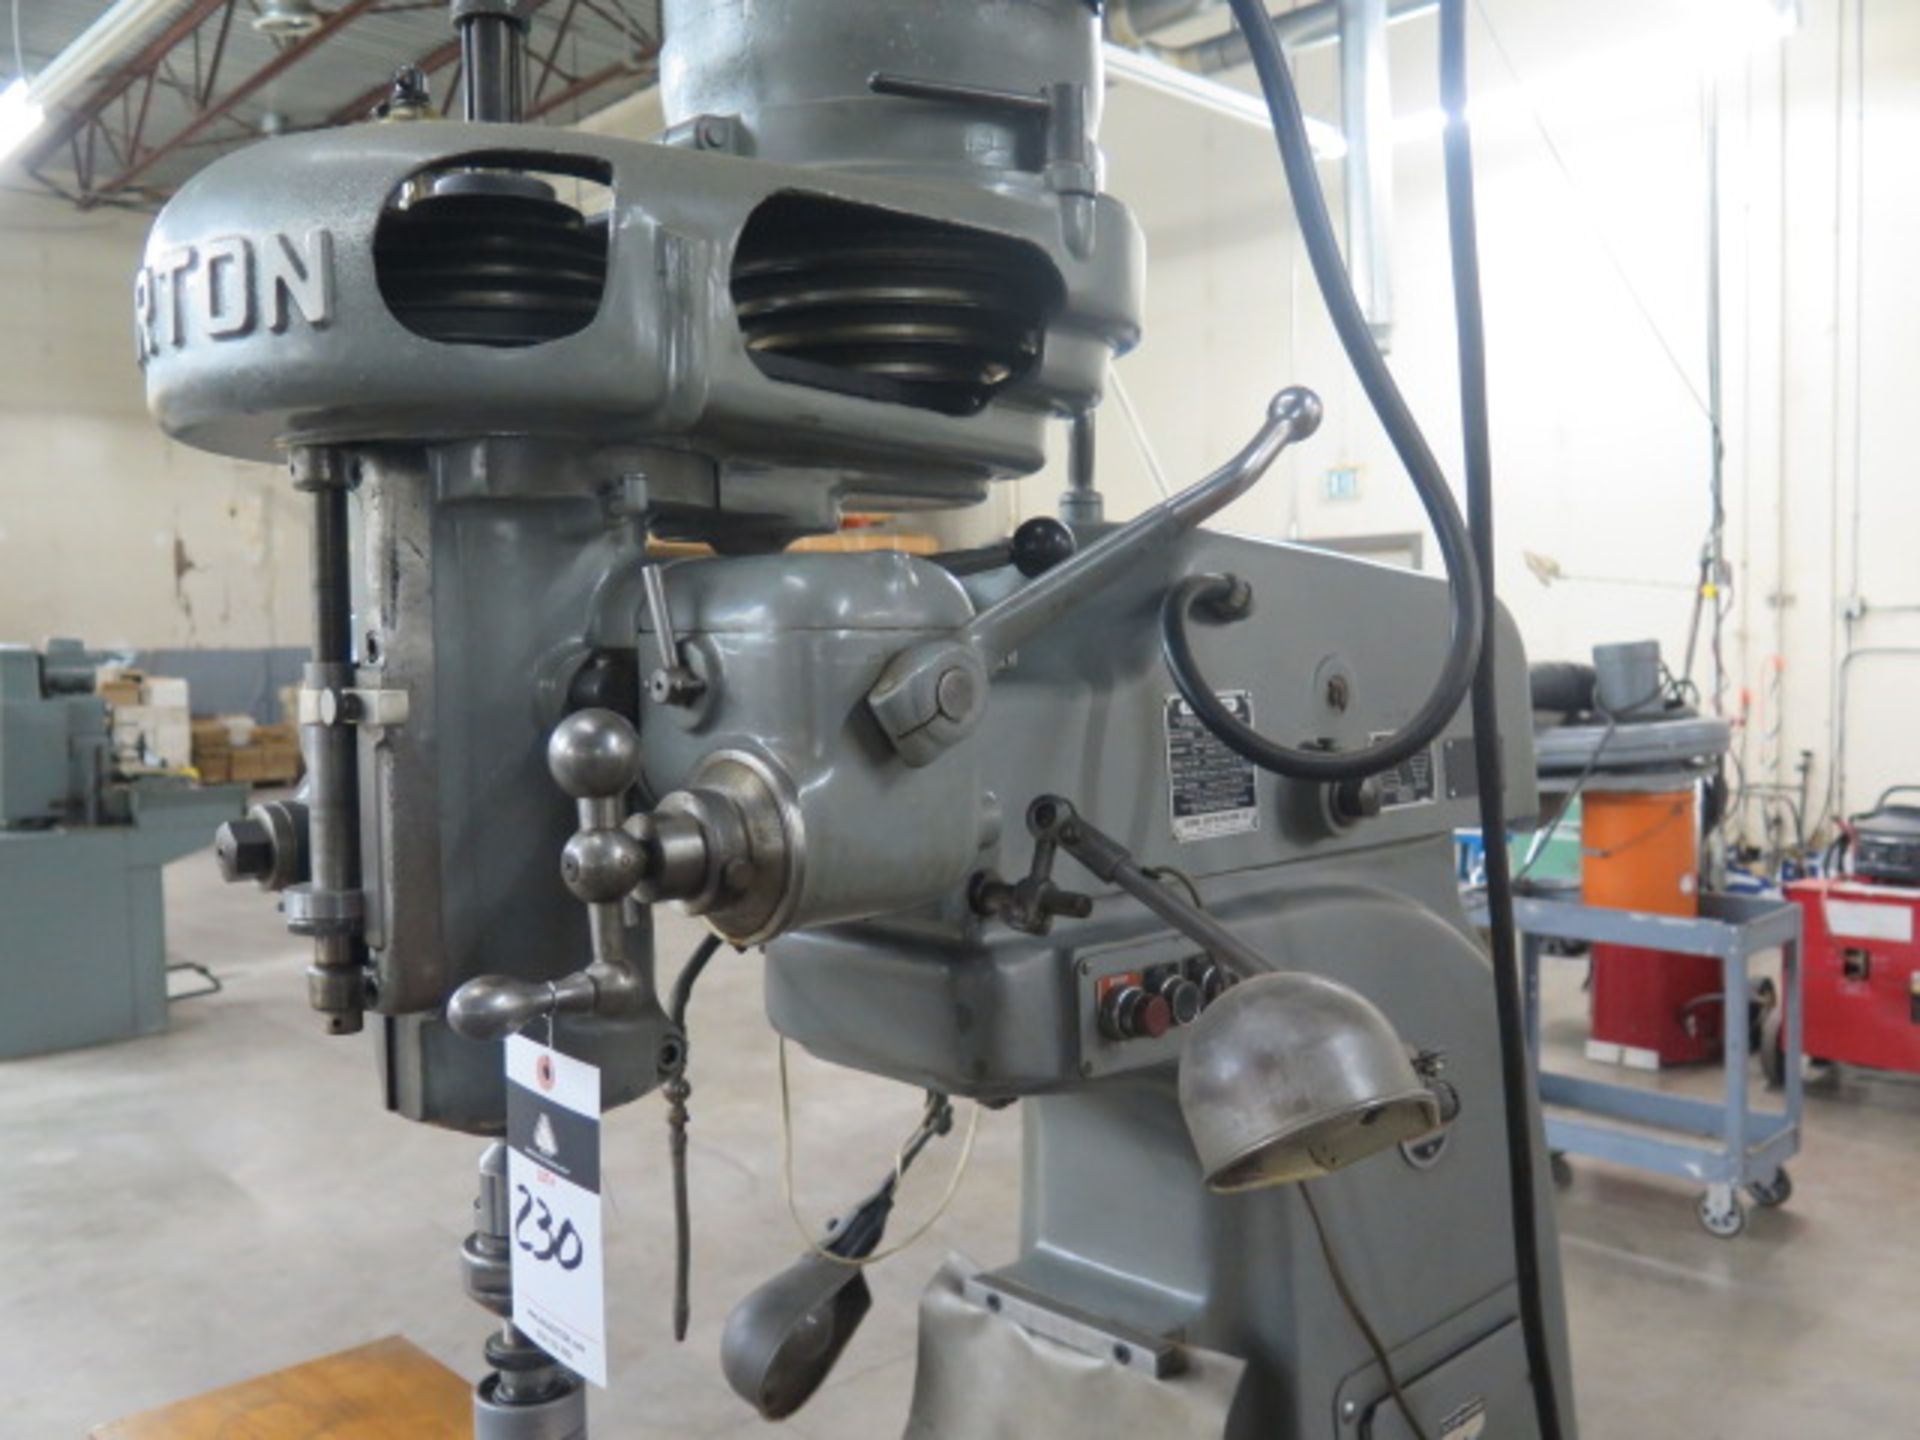 Gorton No. 8 ½ D Vertical Mill s/n 35931 w/ 2Hp Motor, 6-Speeds, Power Feeds, 9 ¼” x 34” Table - Image 5 of 8